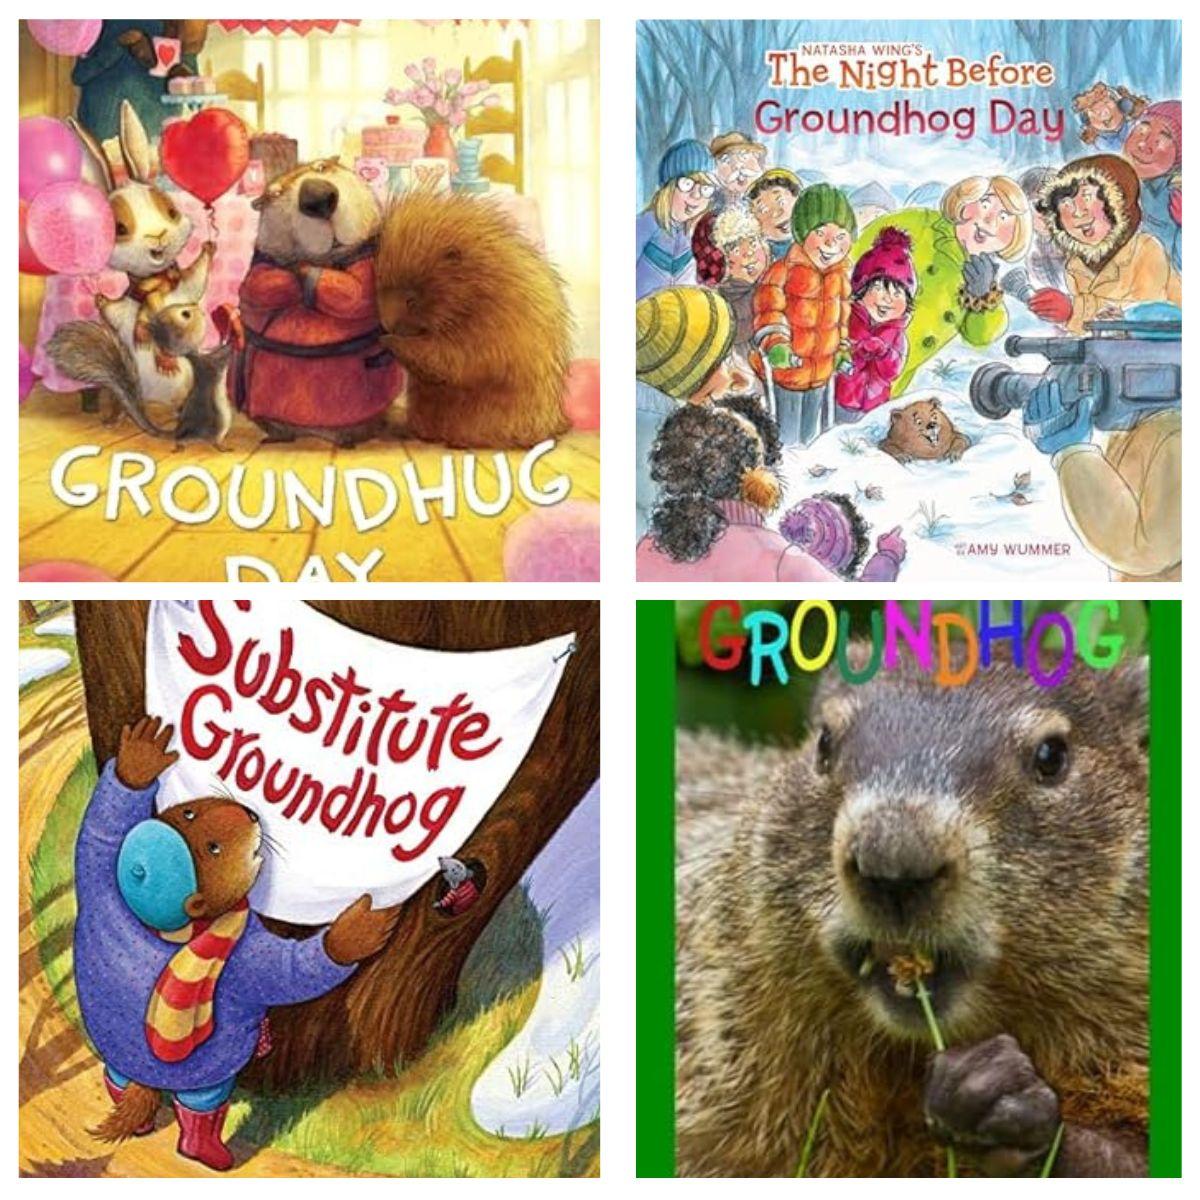 Groundhog Day Books for Kids collage